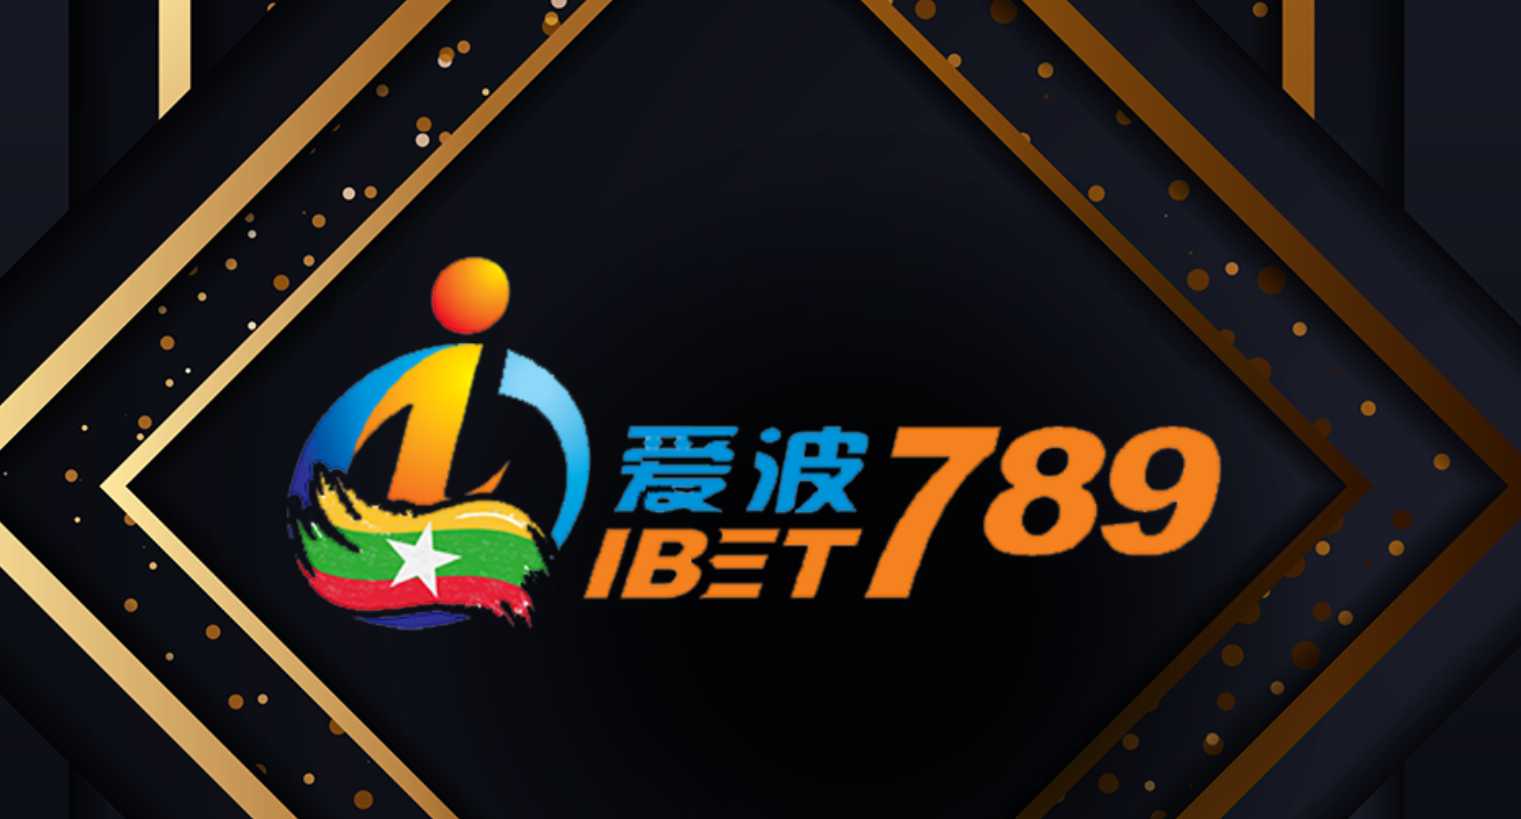 How to bet on iBet789 mobile?